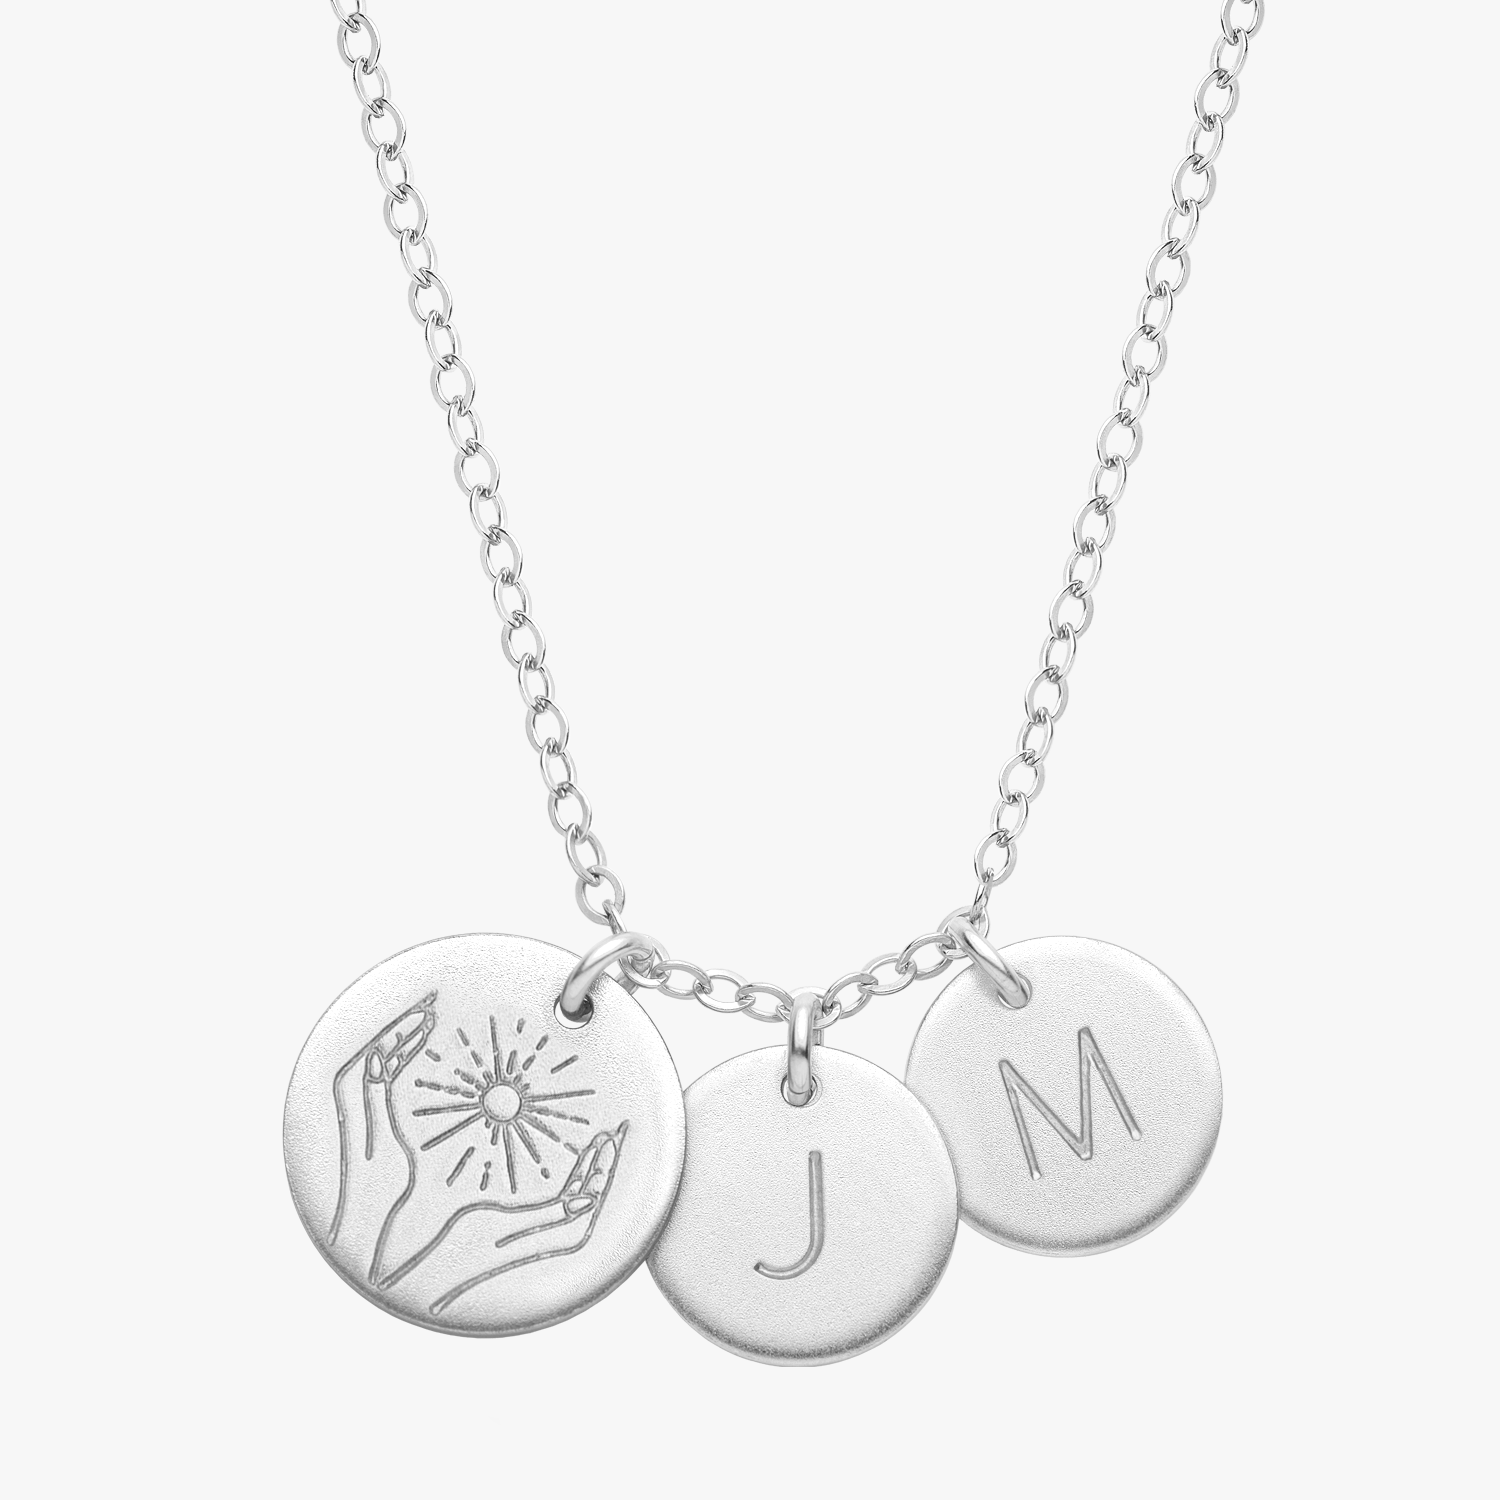 Personalized Tarot Initial Necklace Silver